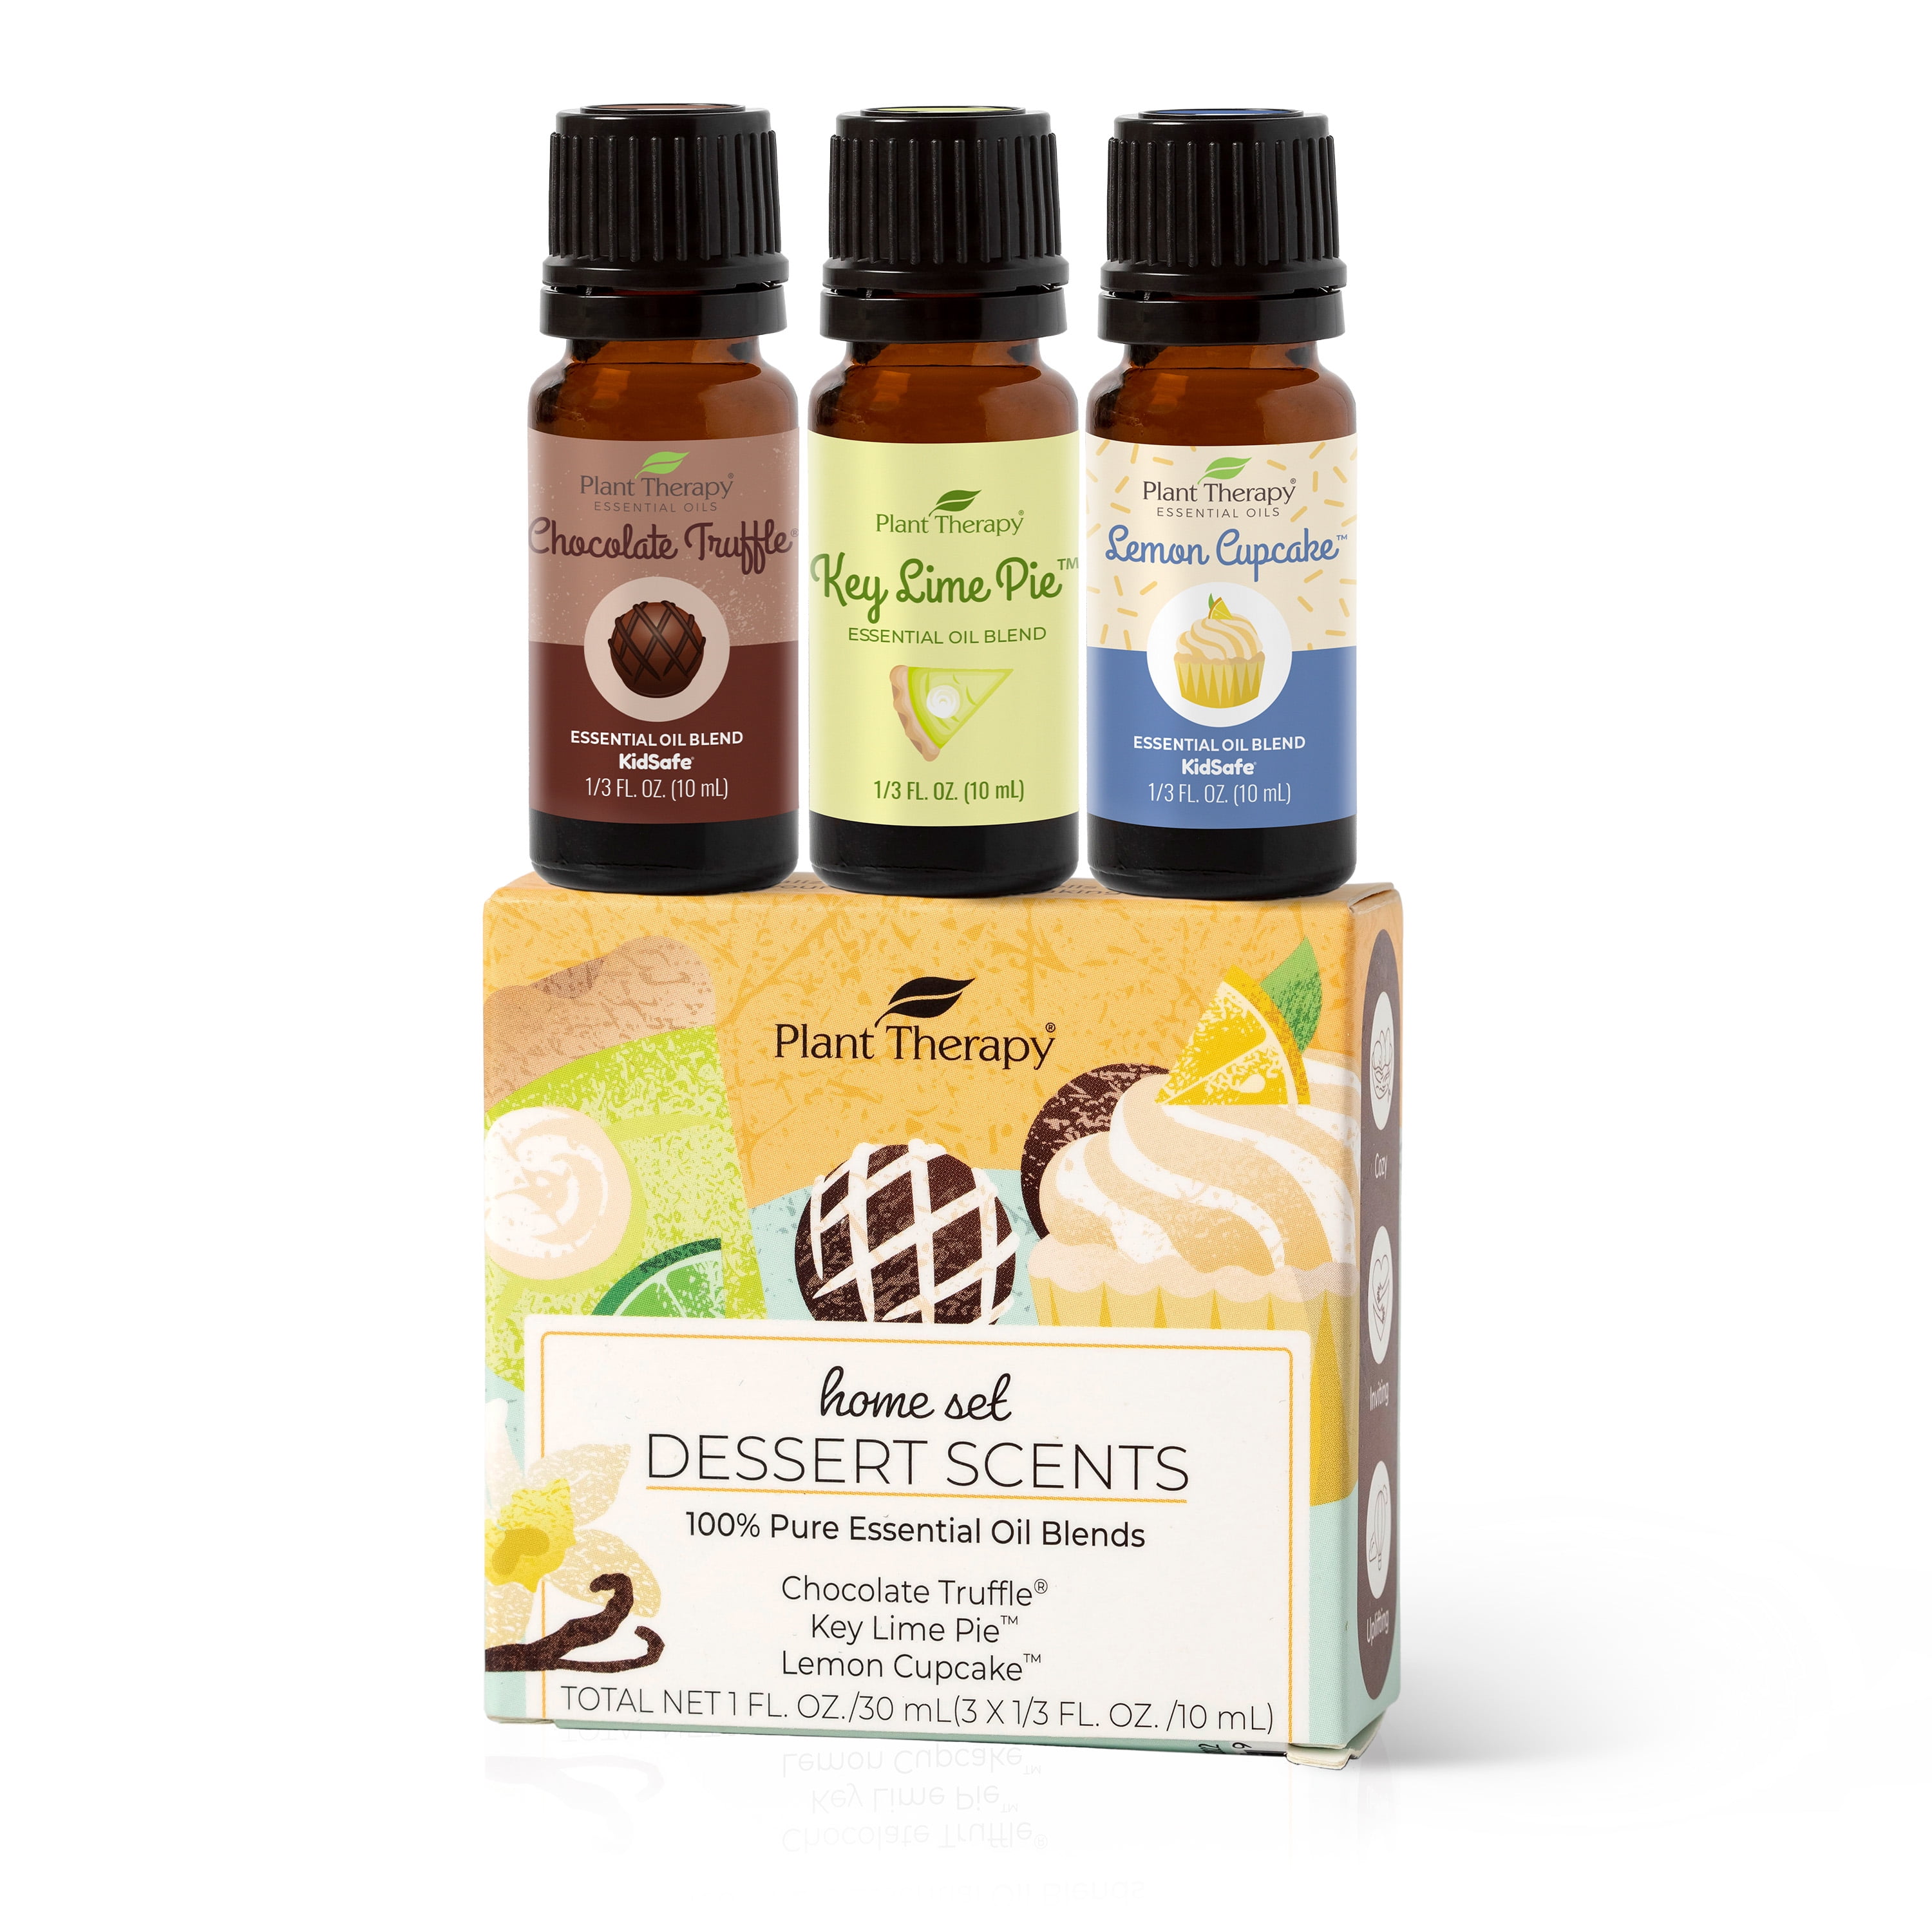 Plant Therapy Dessert Scents Home Set of 3 Essential Oil Blends Including  Natural Scents to Scent Your Home with Chocolate Truffle, Key Lime Pie 